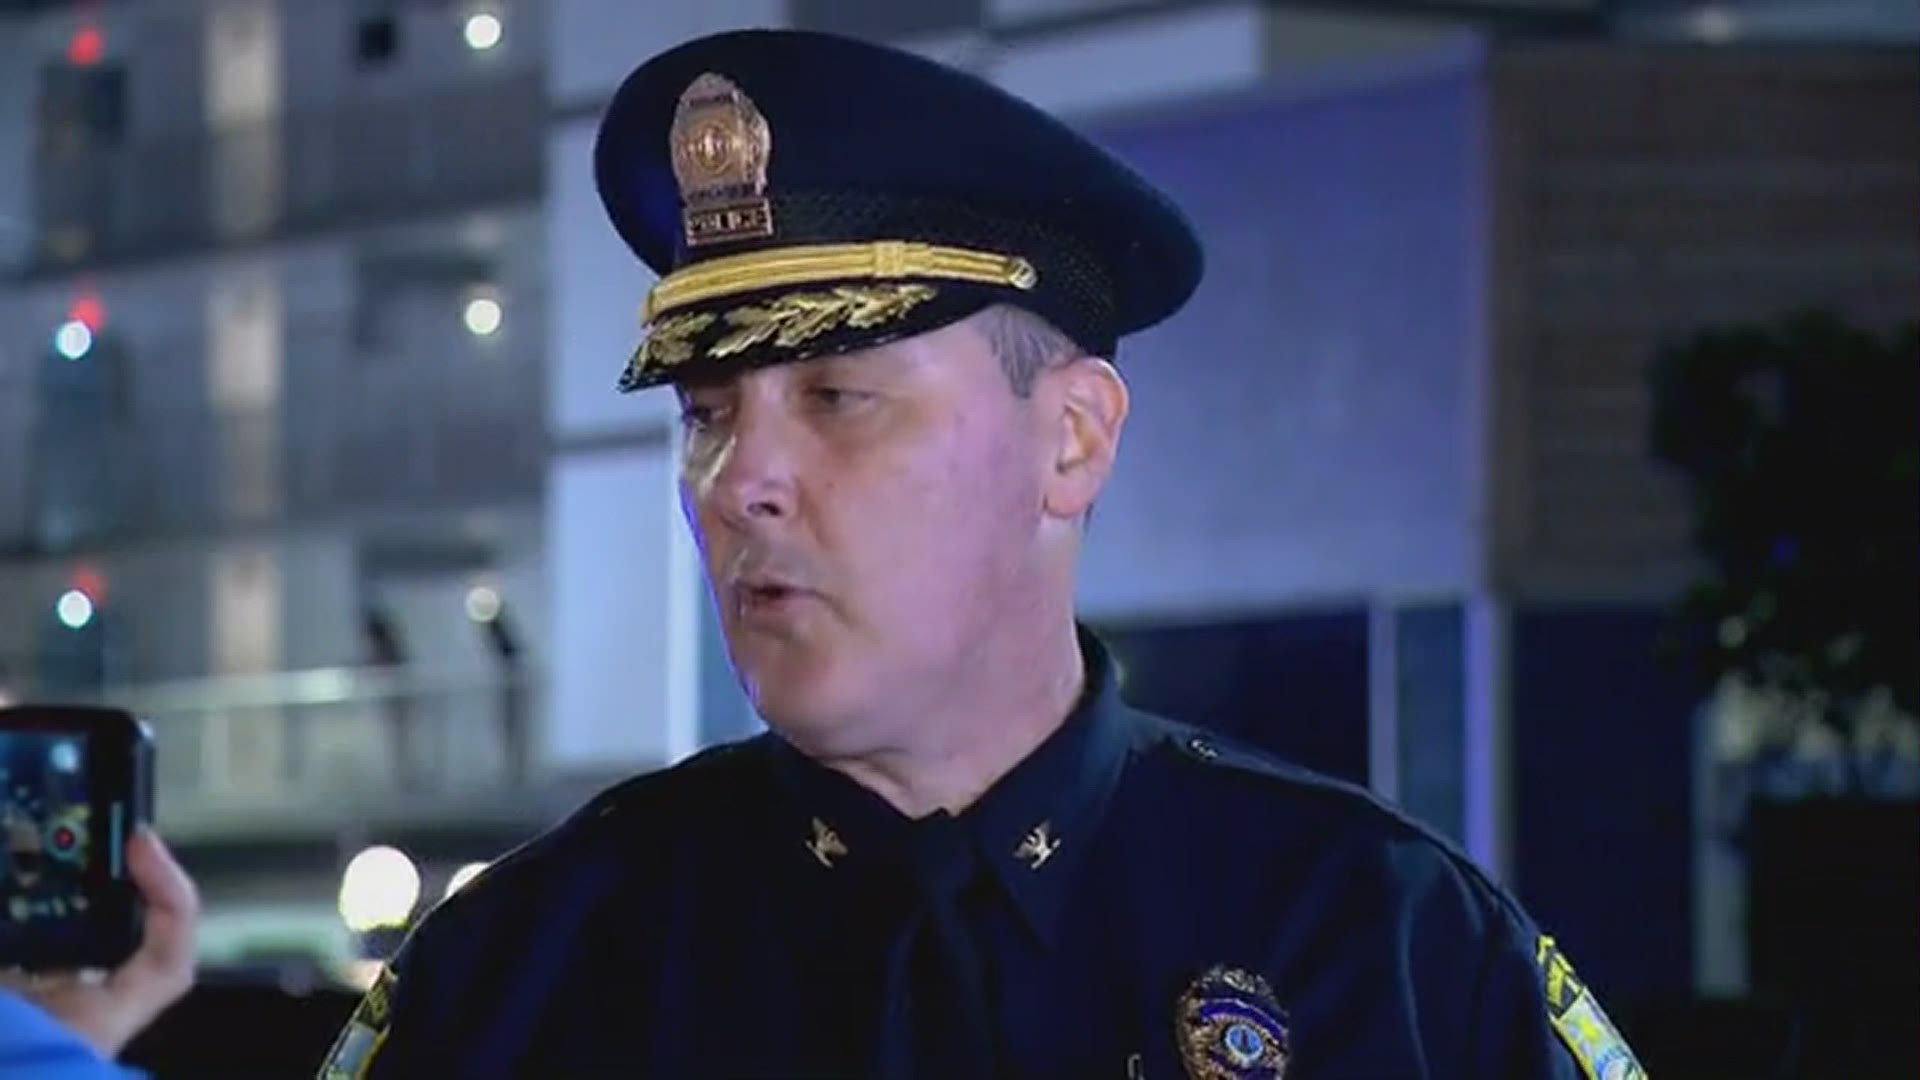 Virginia Beach Police Chief Paul Neudigate talks about shootings at the Oceanfront that took place on March 26, 2021, leaving some dead and others hurt.